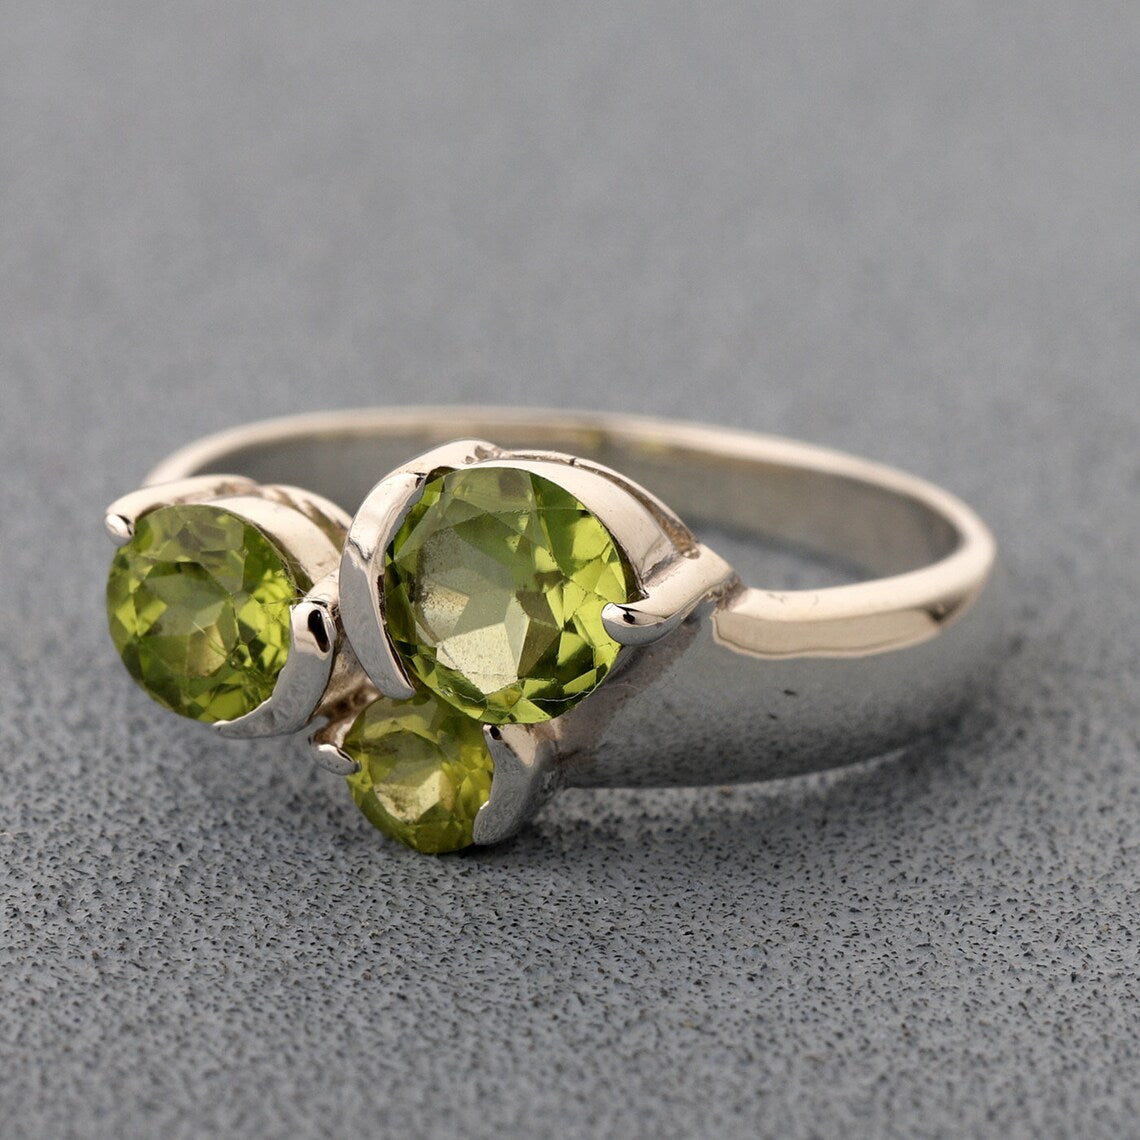 Round Peridot Ring, Peridot Stacking Ring, August Birthstone Ring Green Stone Ring, Promise Ring US 8 Peridot Stack Ring Gemstone Ring